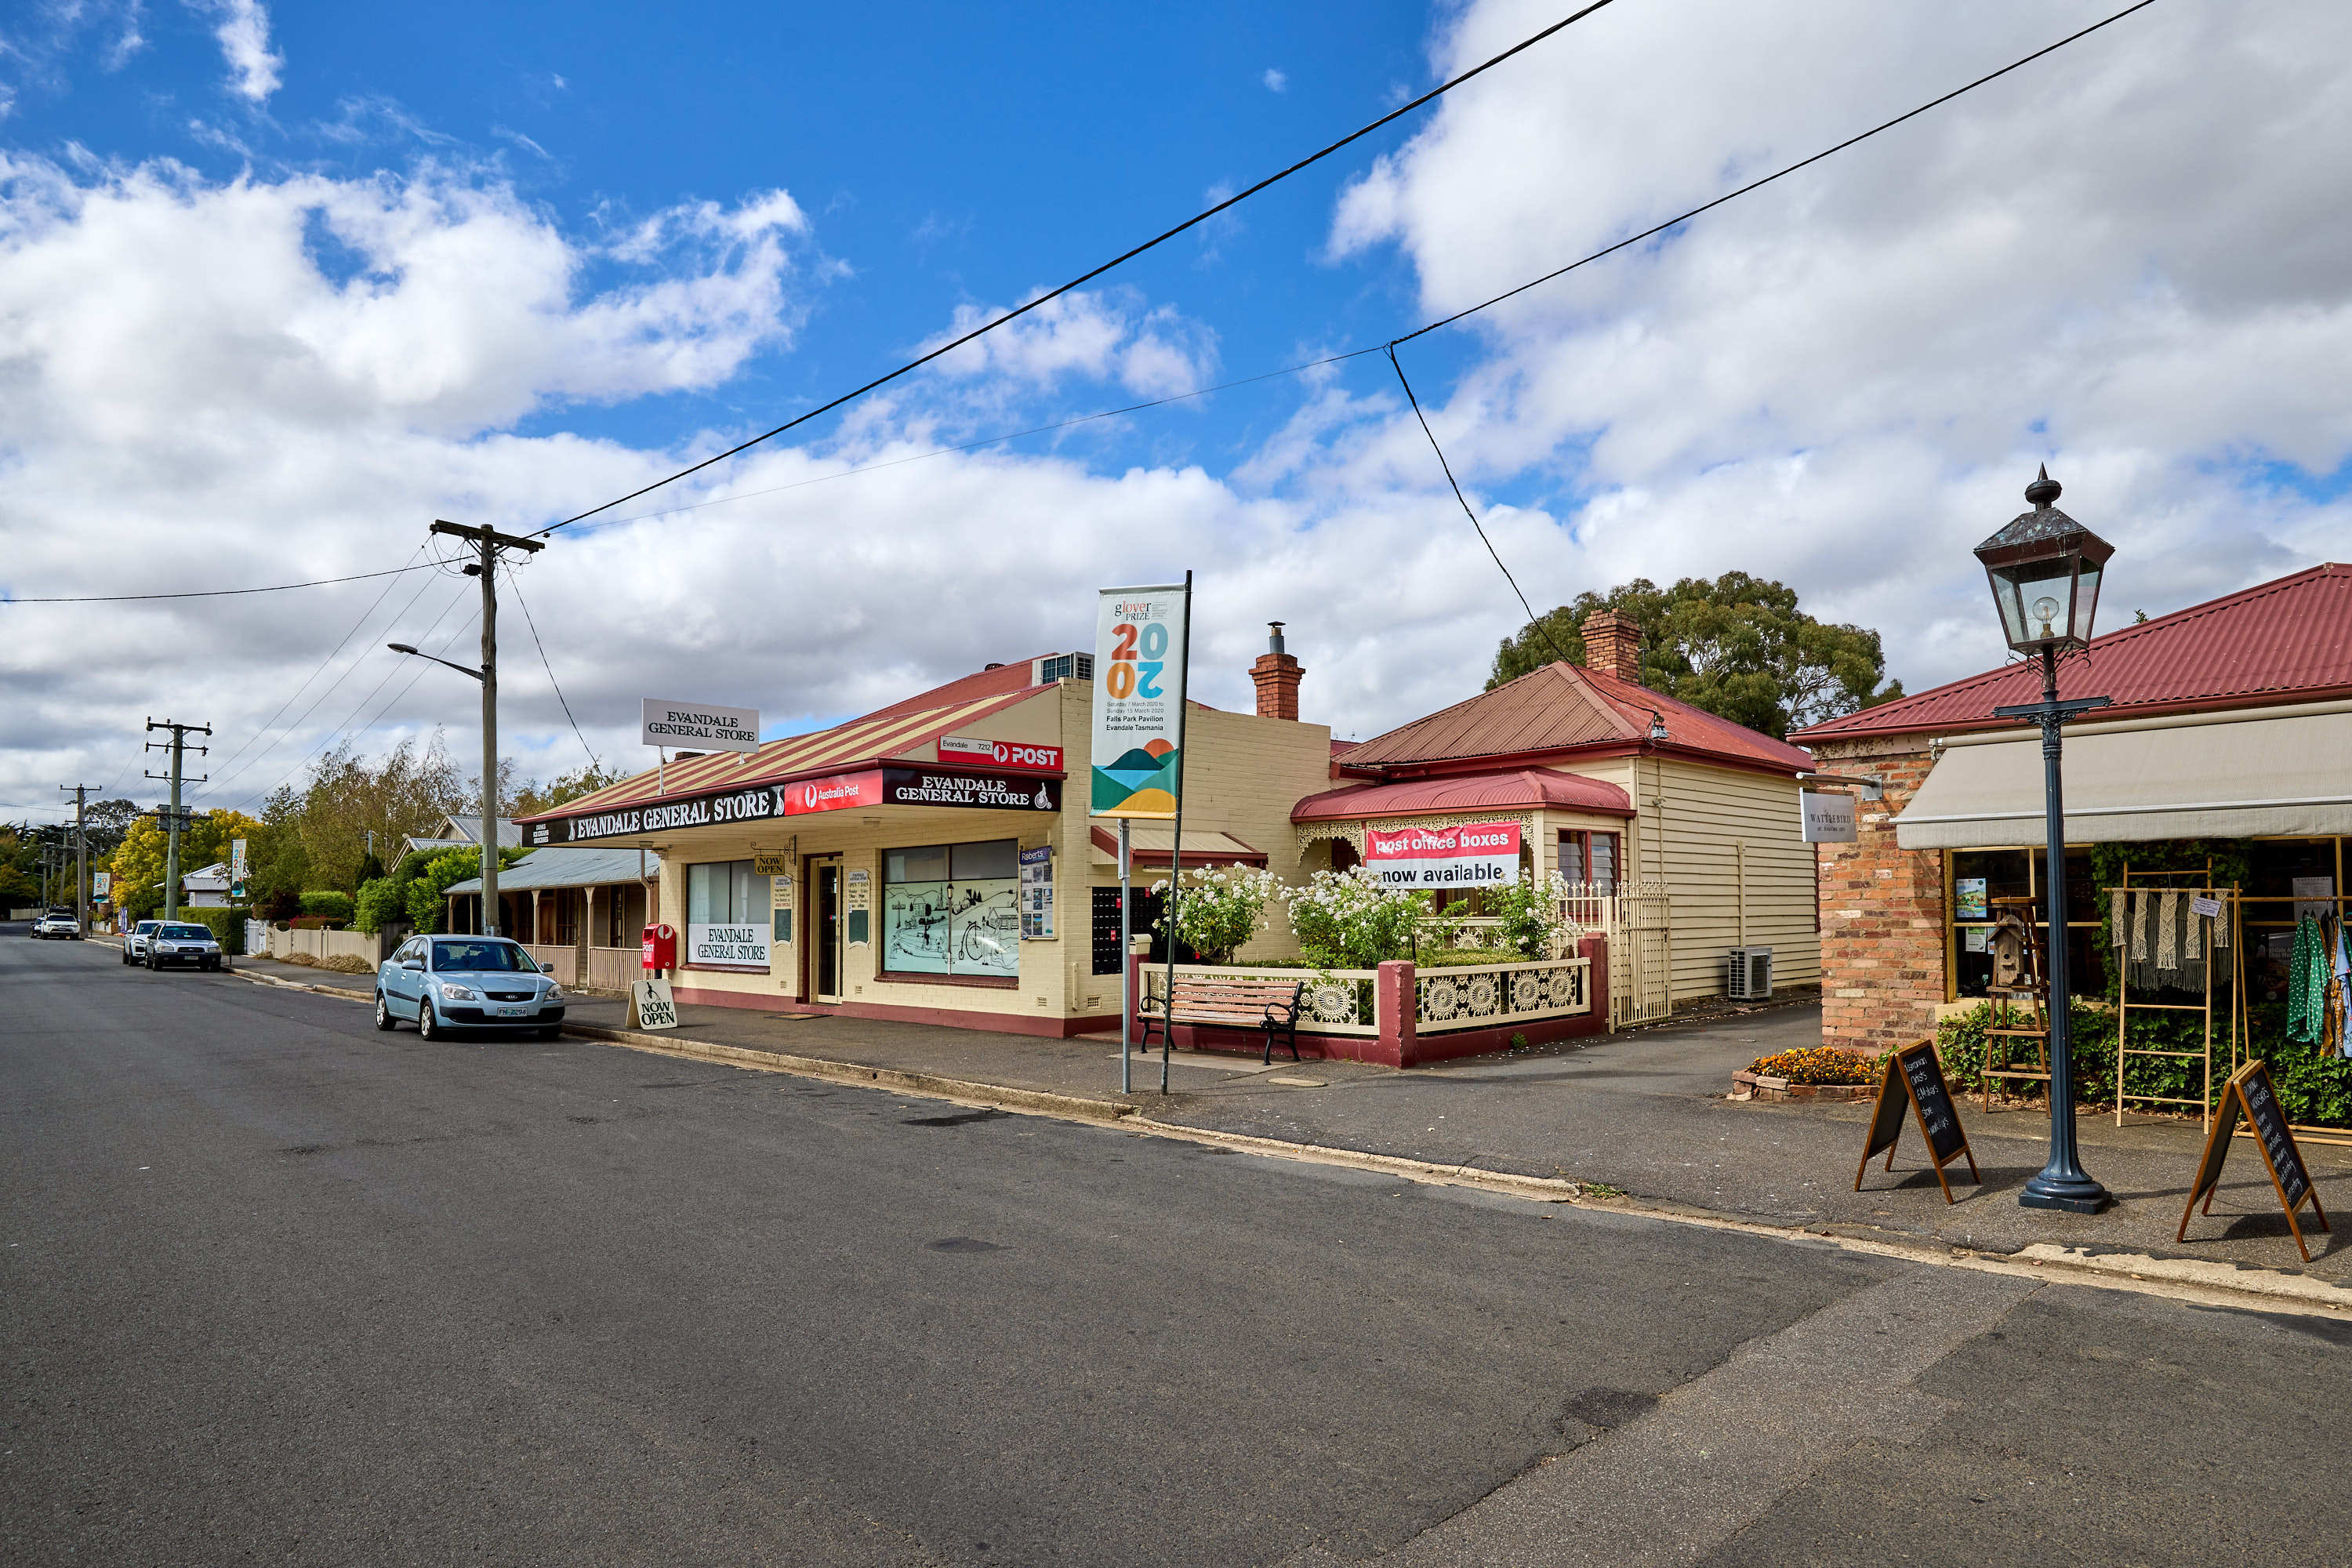 Evandale General Store & Post Office thumbnail 1